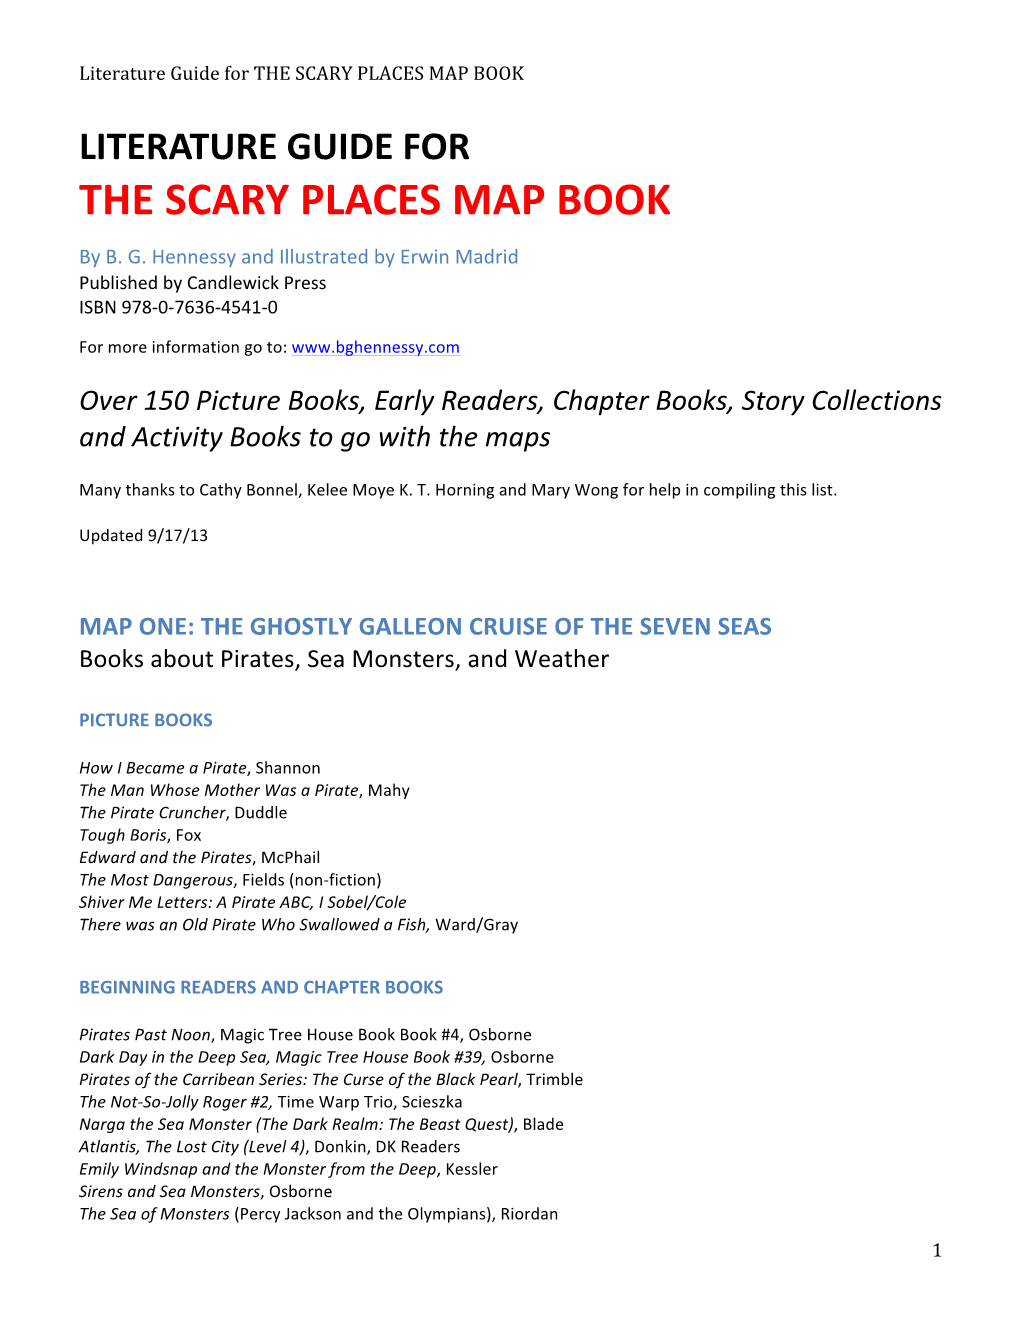 The Scary Places Map Book